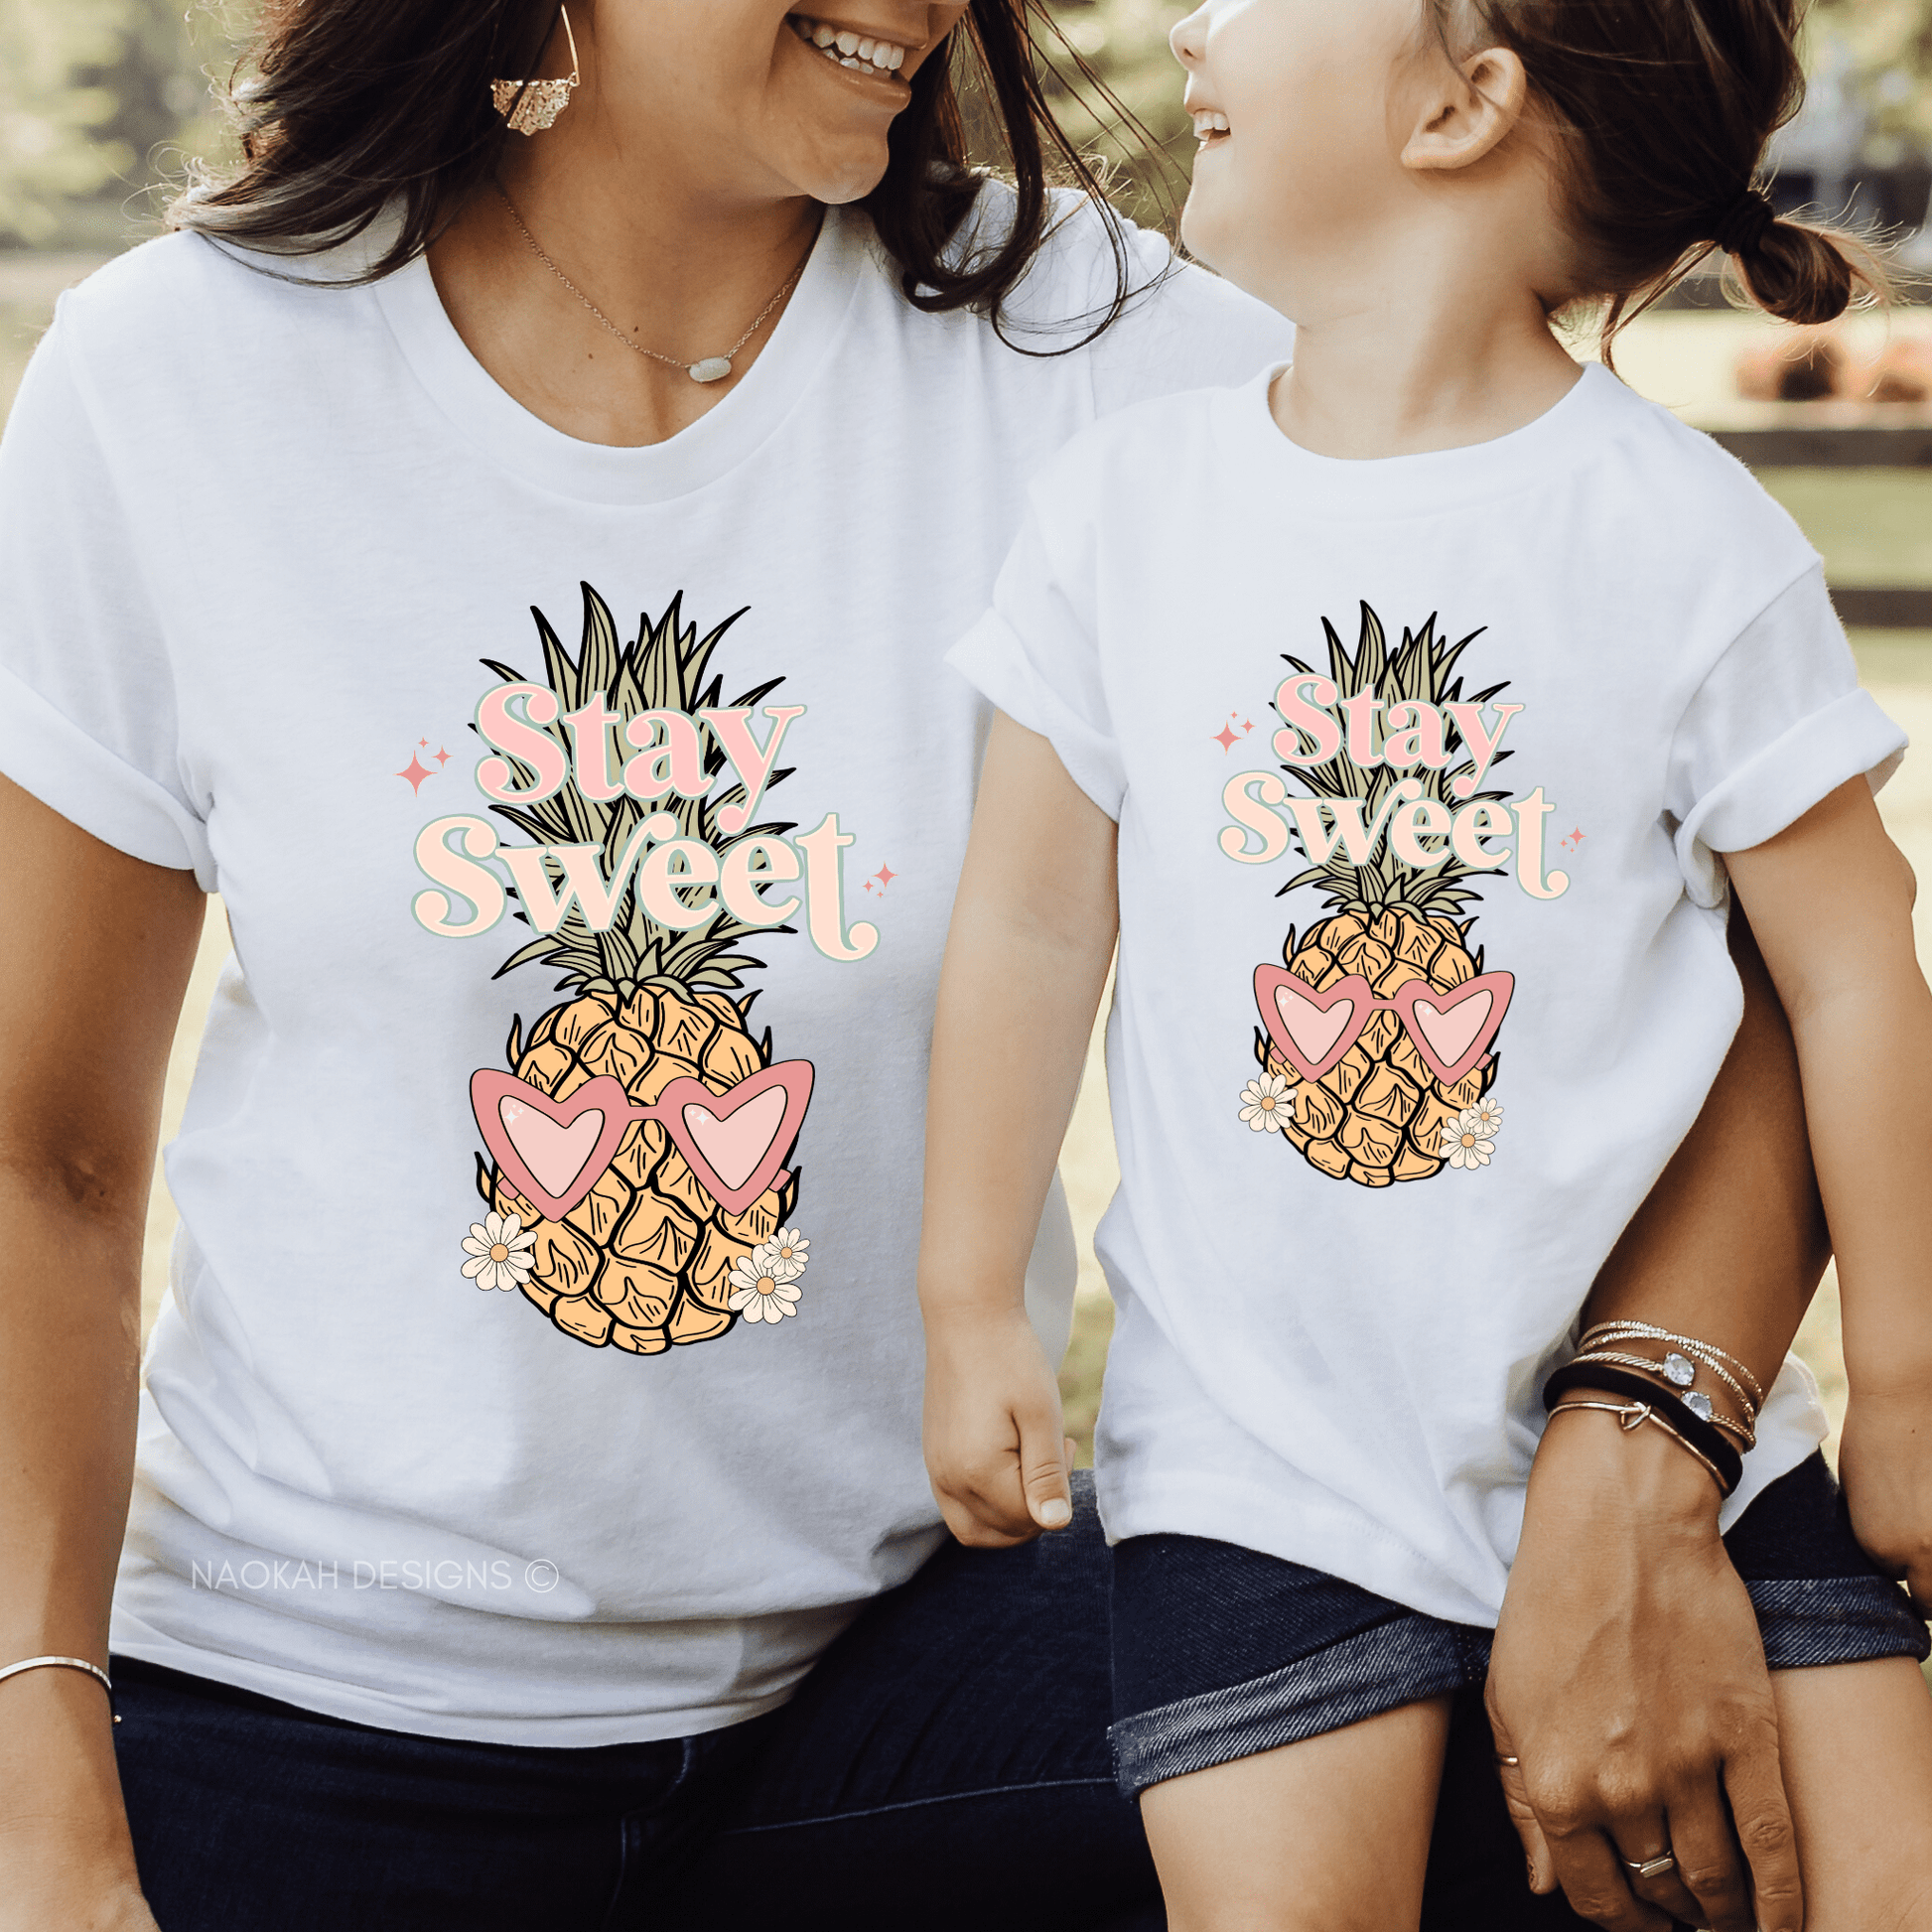 Stay Sweet, Stay Cool Pineapple Shirt, Toddler Pineapple Shirt, Kids Stay Cool Pineapple Shirt, Youth Stay Sweet Pineapple Shirt, IVF Mom Shirt, IVF Kids Shirt, Infertility Tee